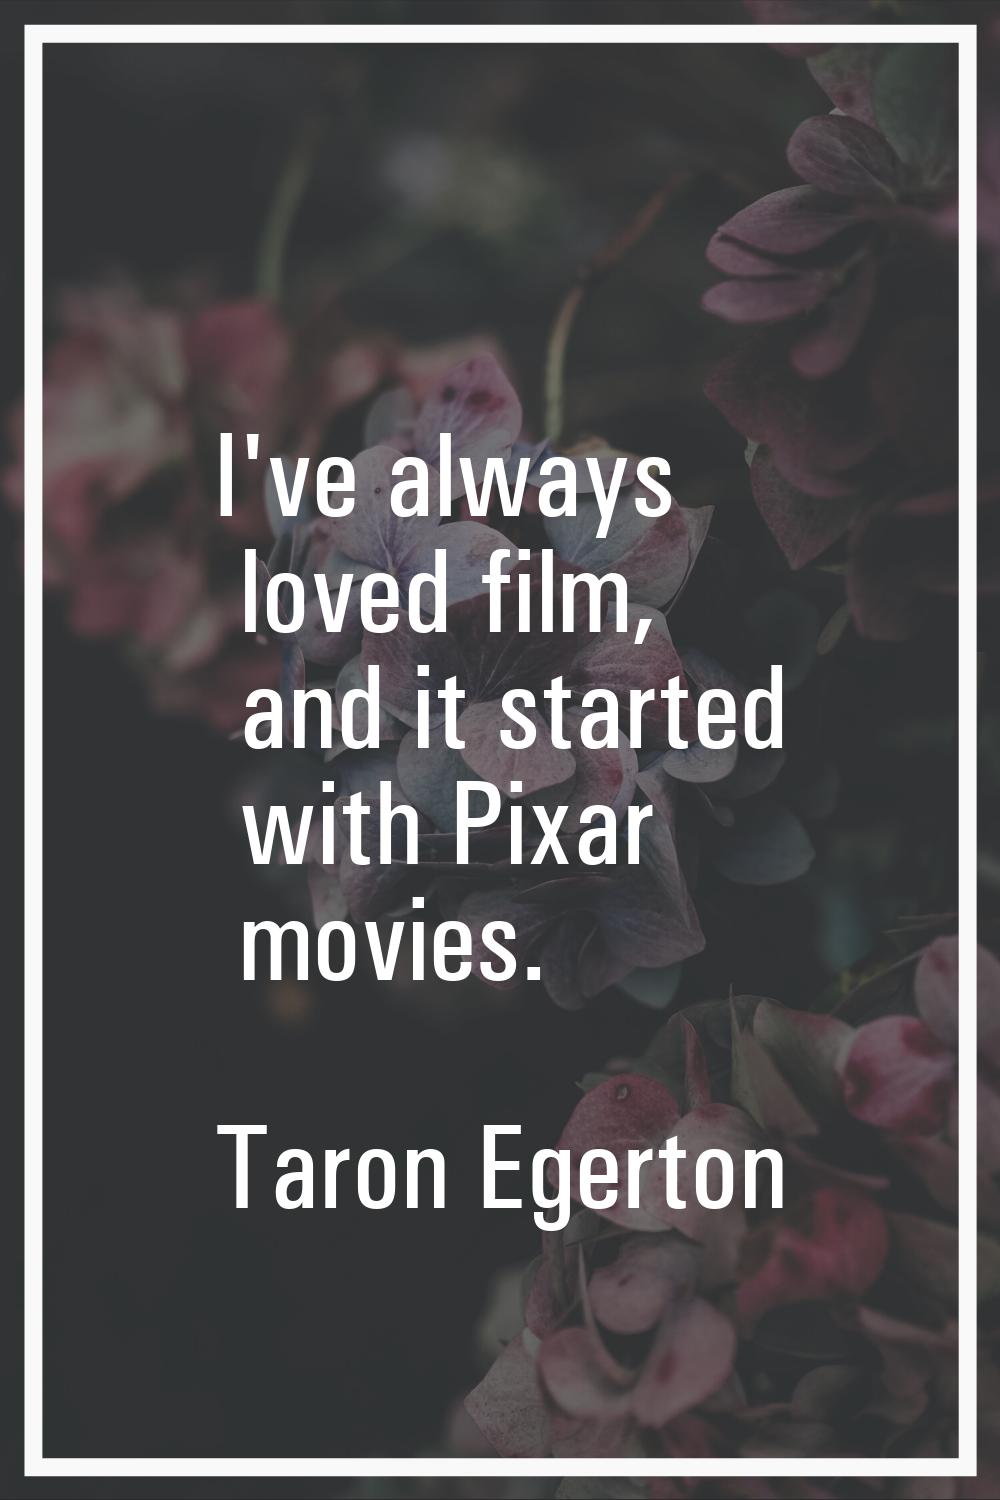 I've always loved film, and it started with Pixar movies.